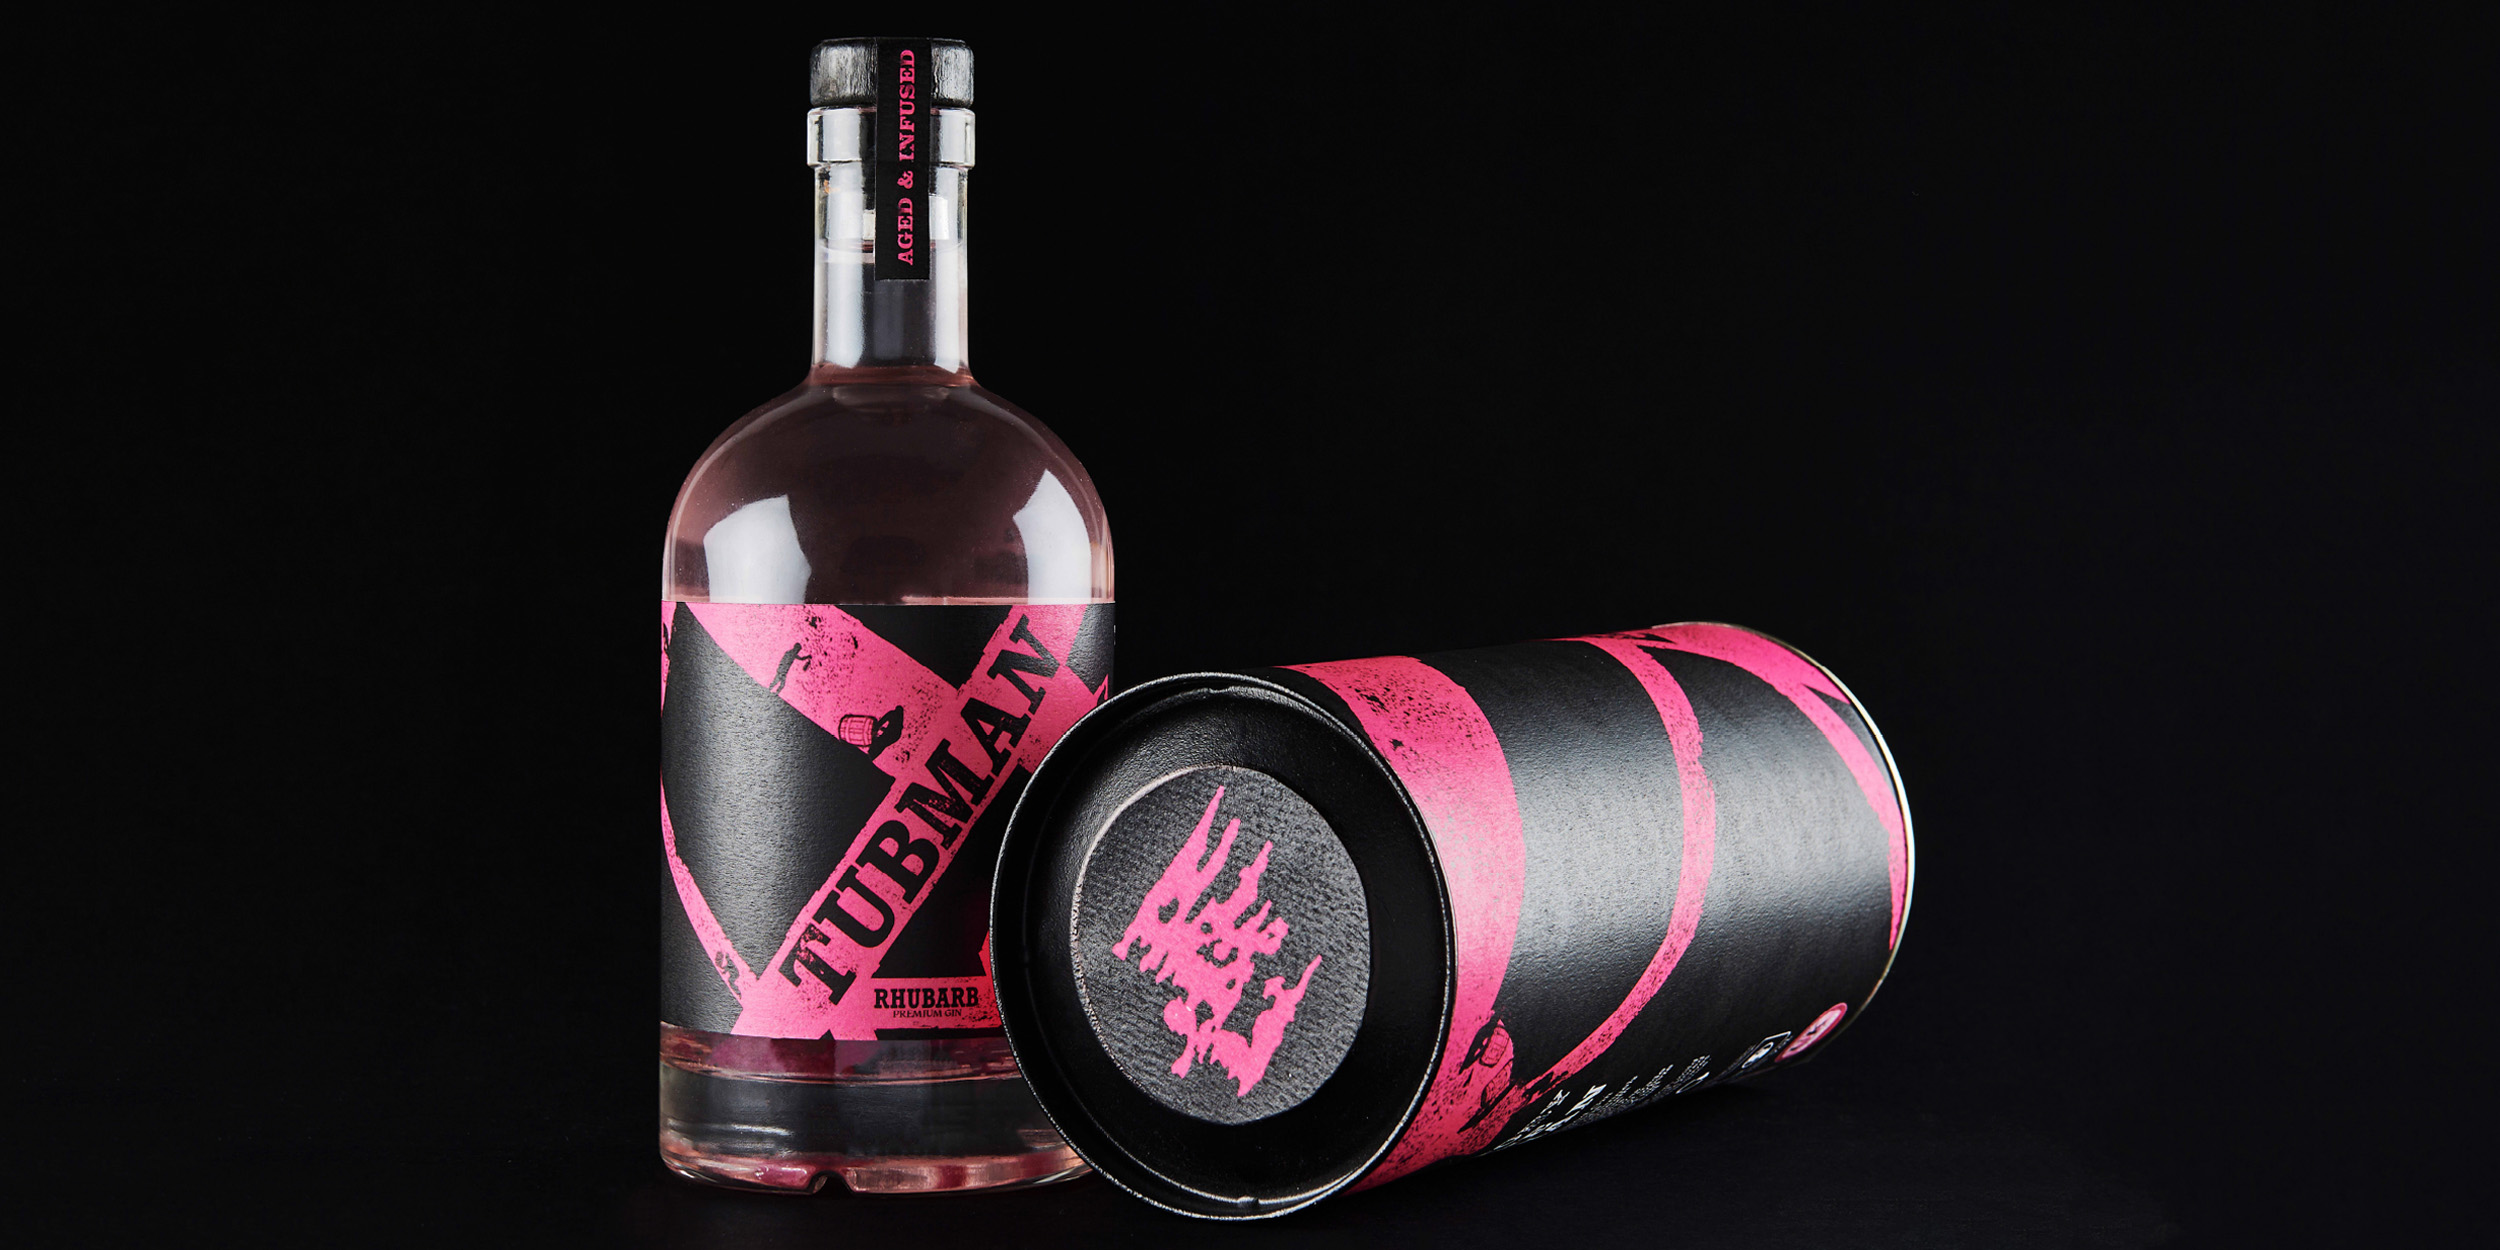 Design work by Cian Paige, showcasing the bottle and packaging in its vibrant pink rhubarb inspired hue.